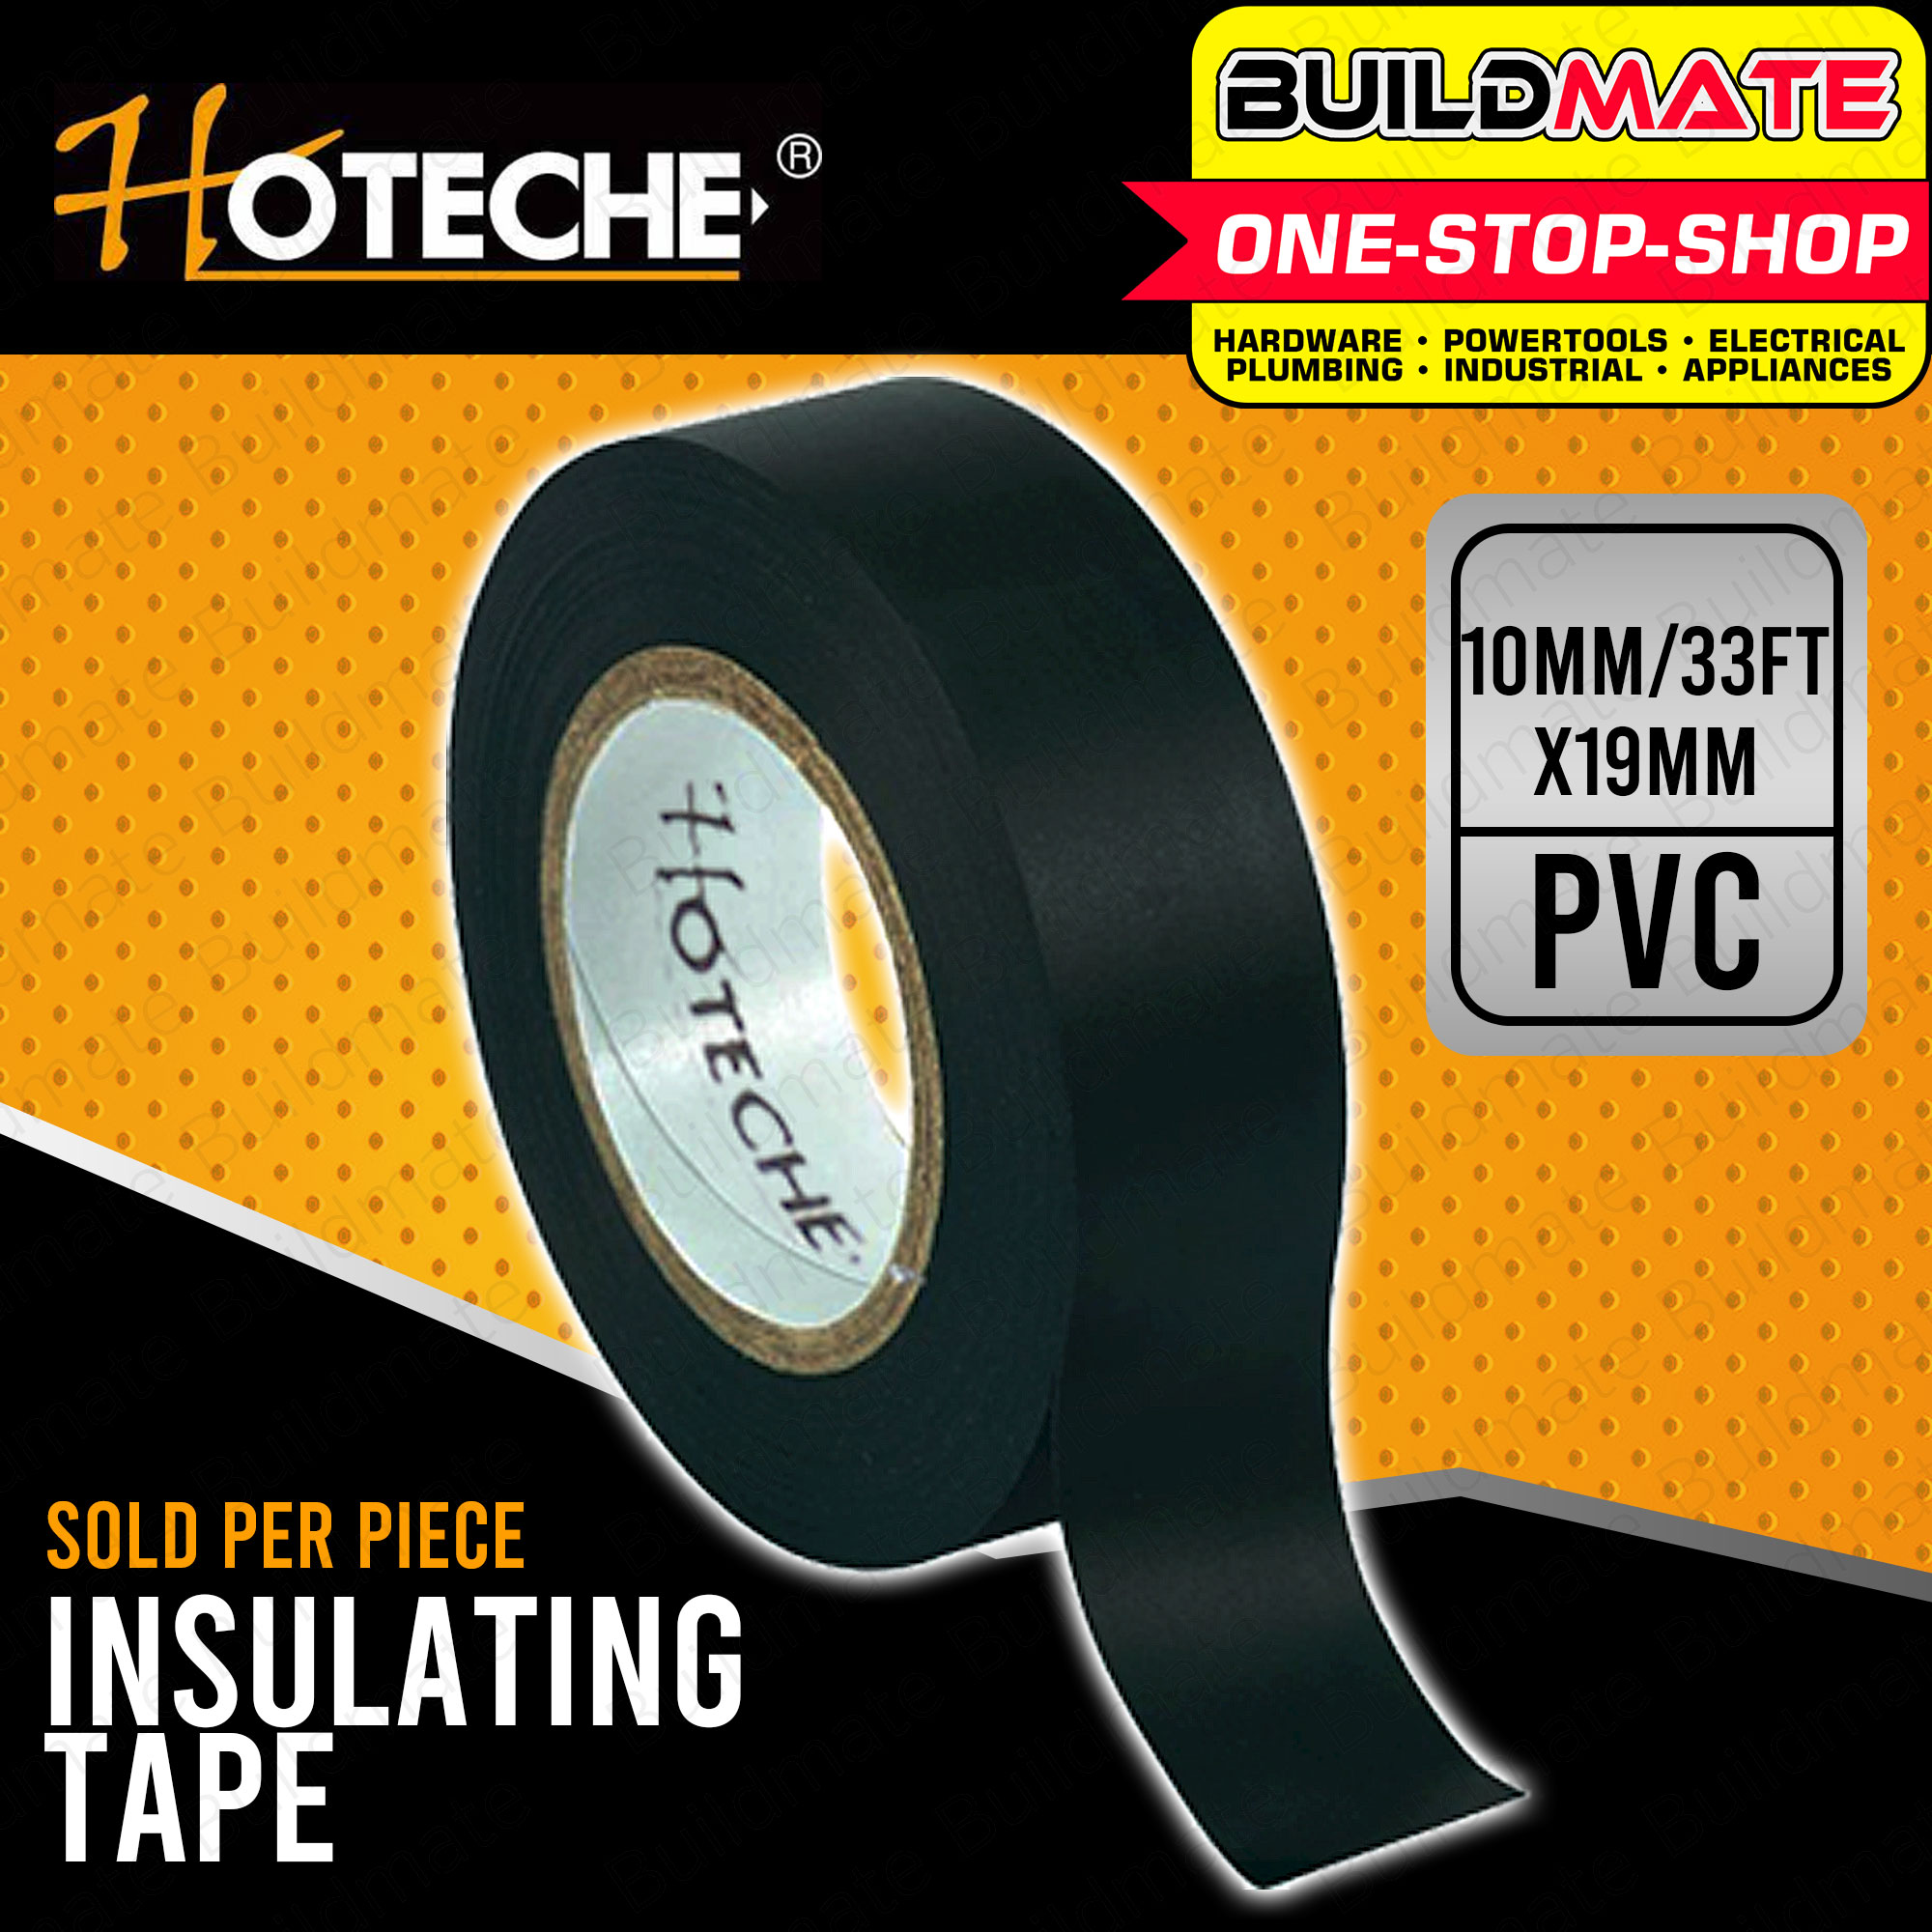 Buy HOTECHE Top Products at Best Prices online | lazada.com.ph